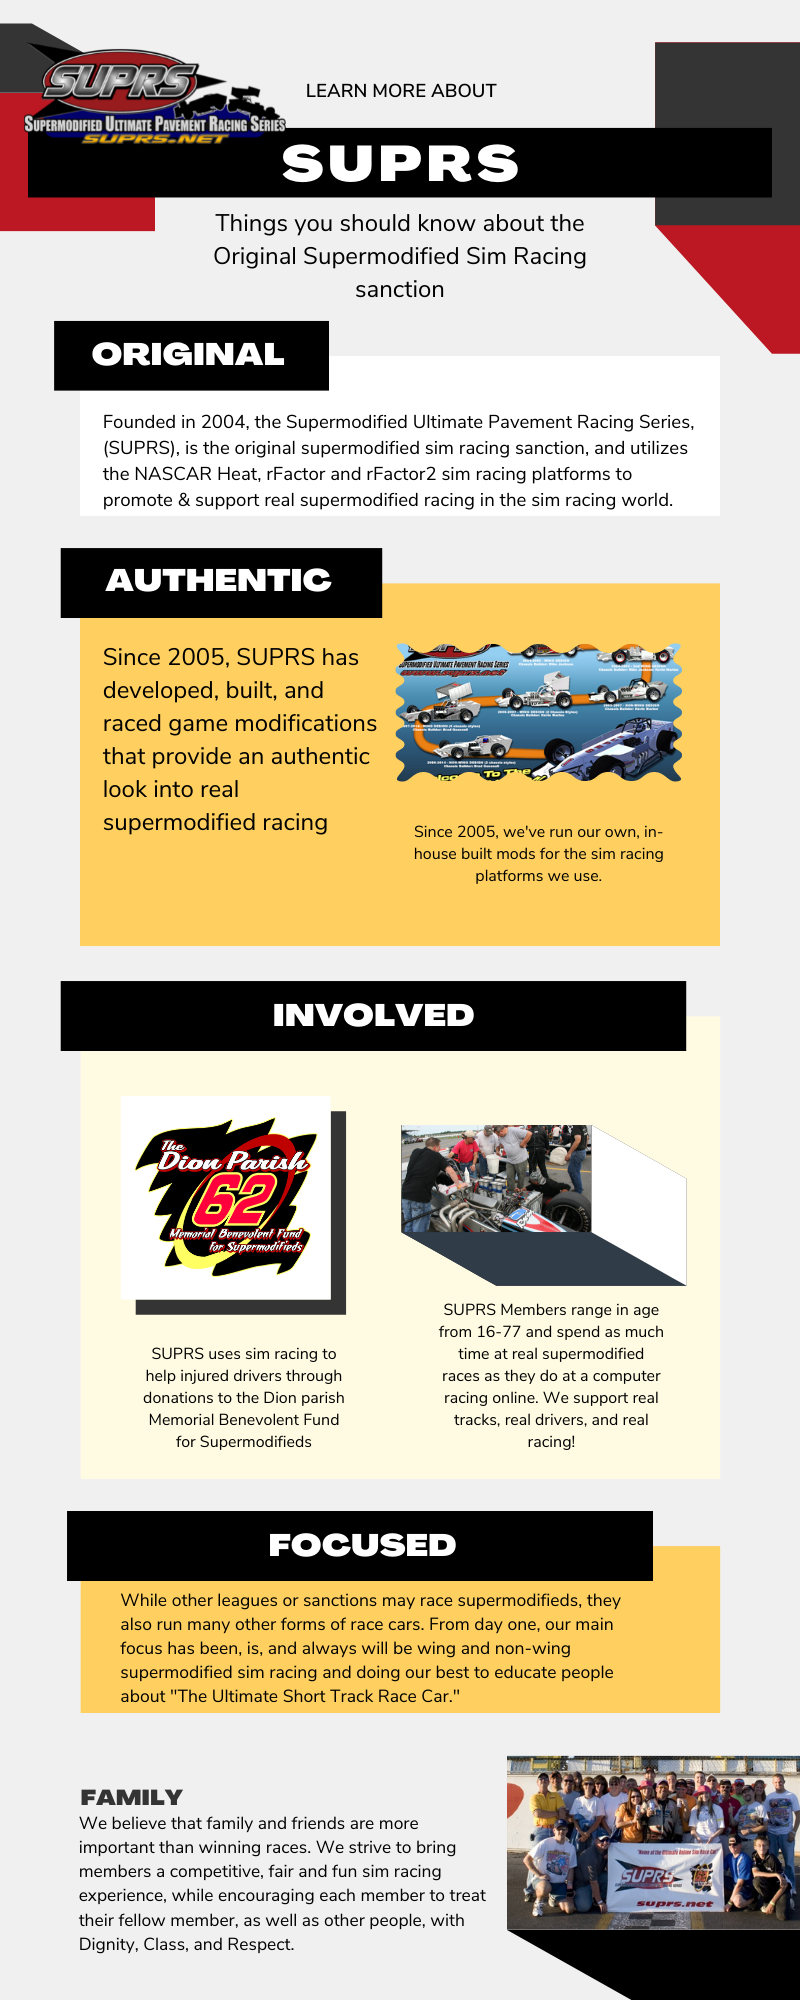 SUPRS 2021 need to know infographic